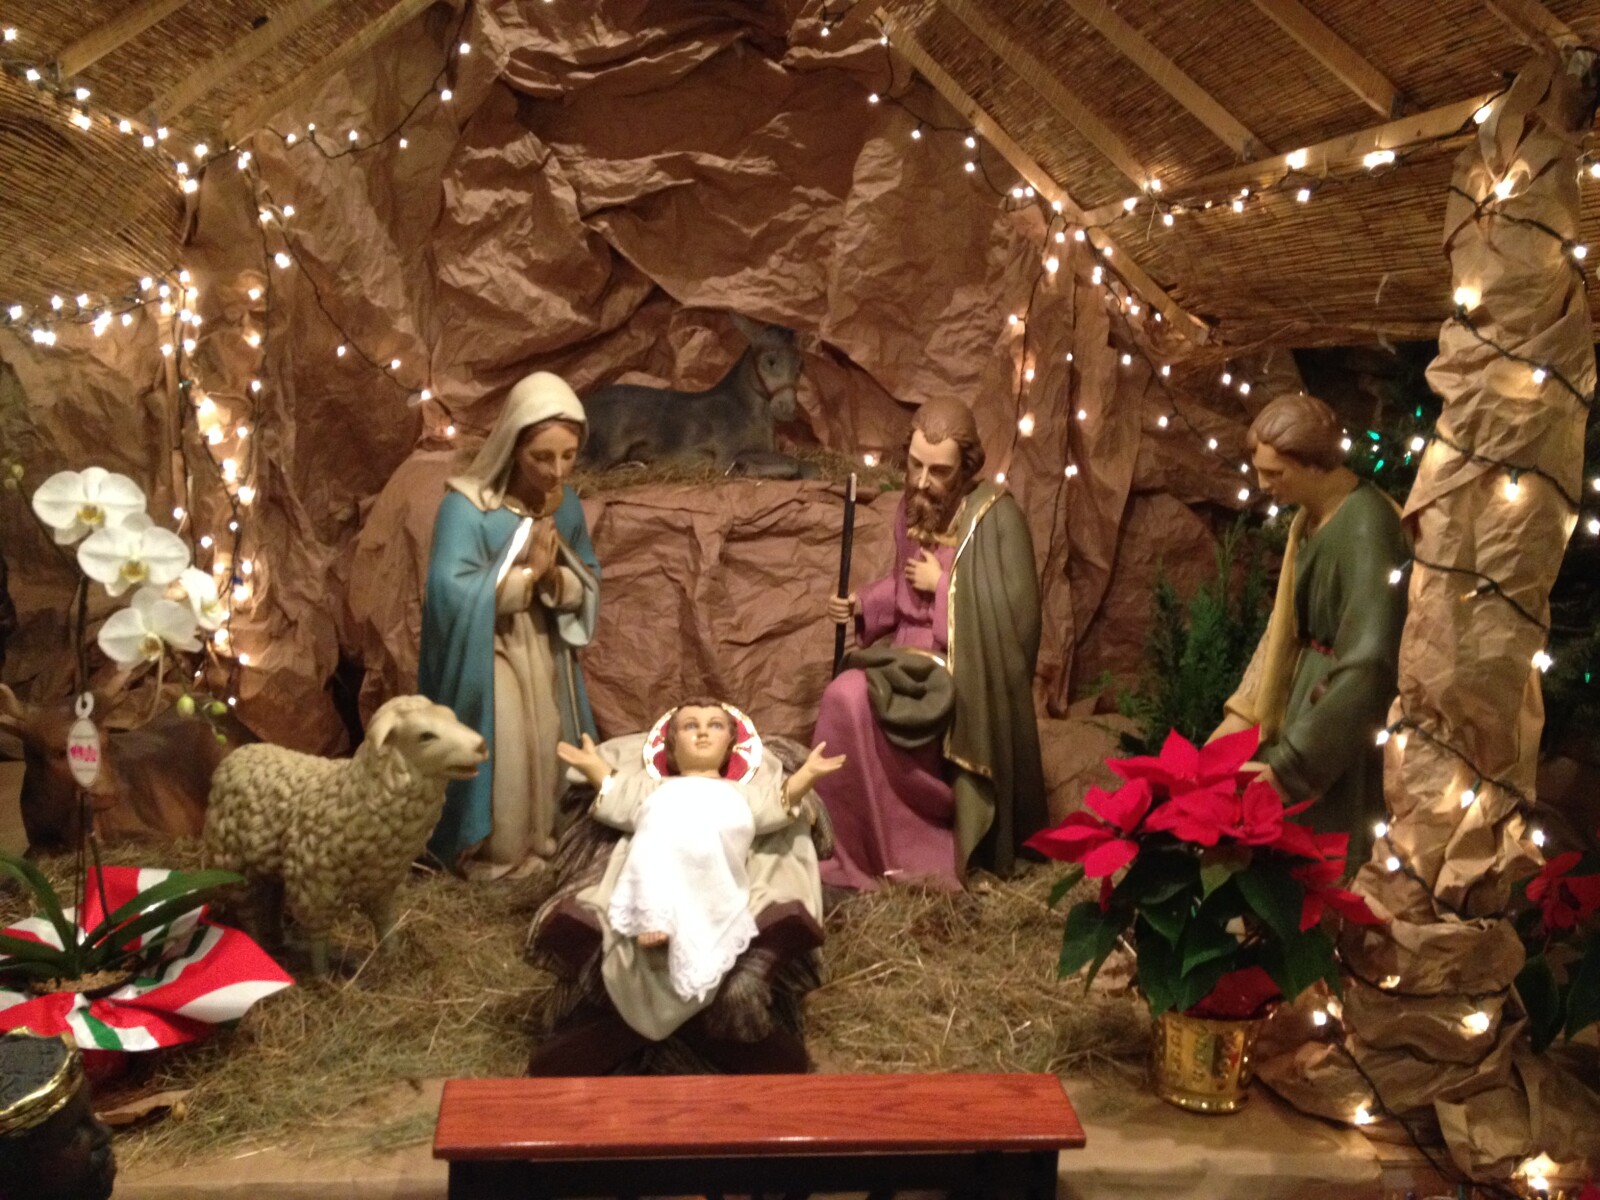 Christmas image of a Nativity scene with Christmas lights around it